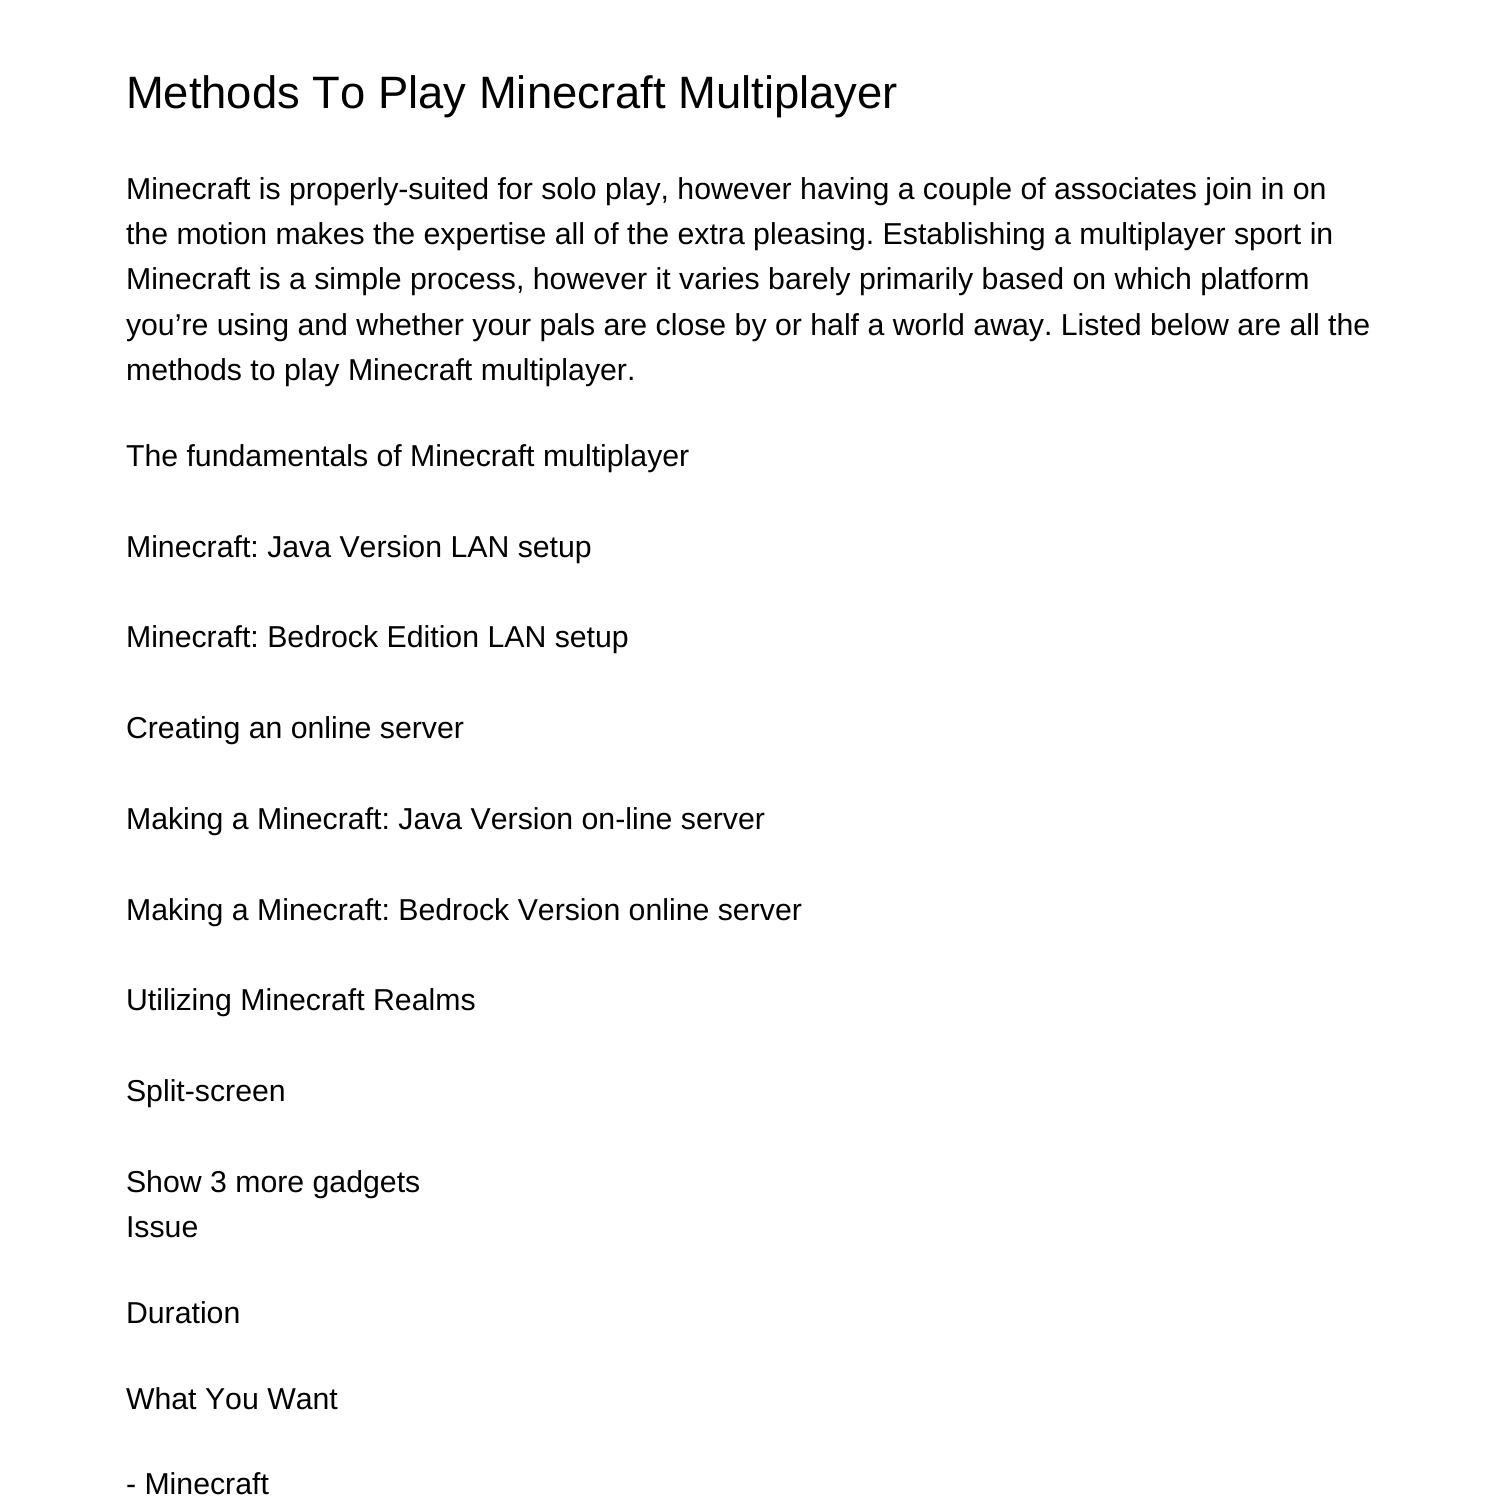 How One Can Play Minecraft Multiplayerpdfgn.pdf.pdf DocDroid